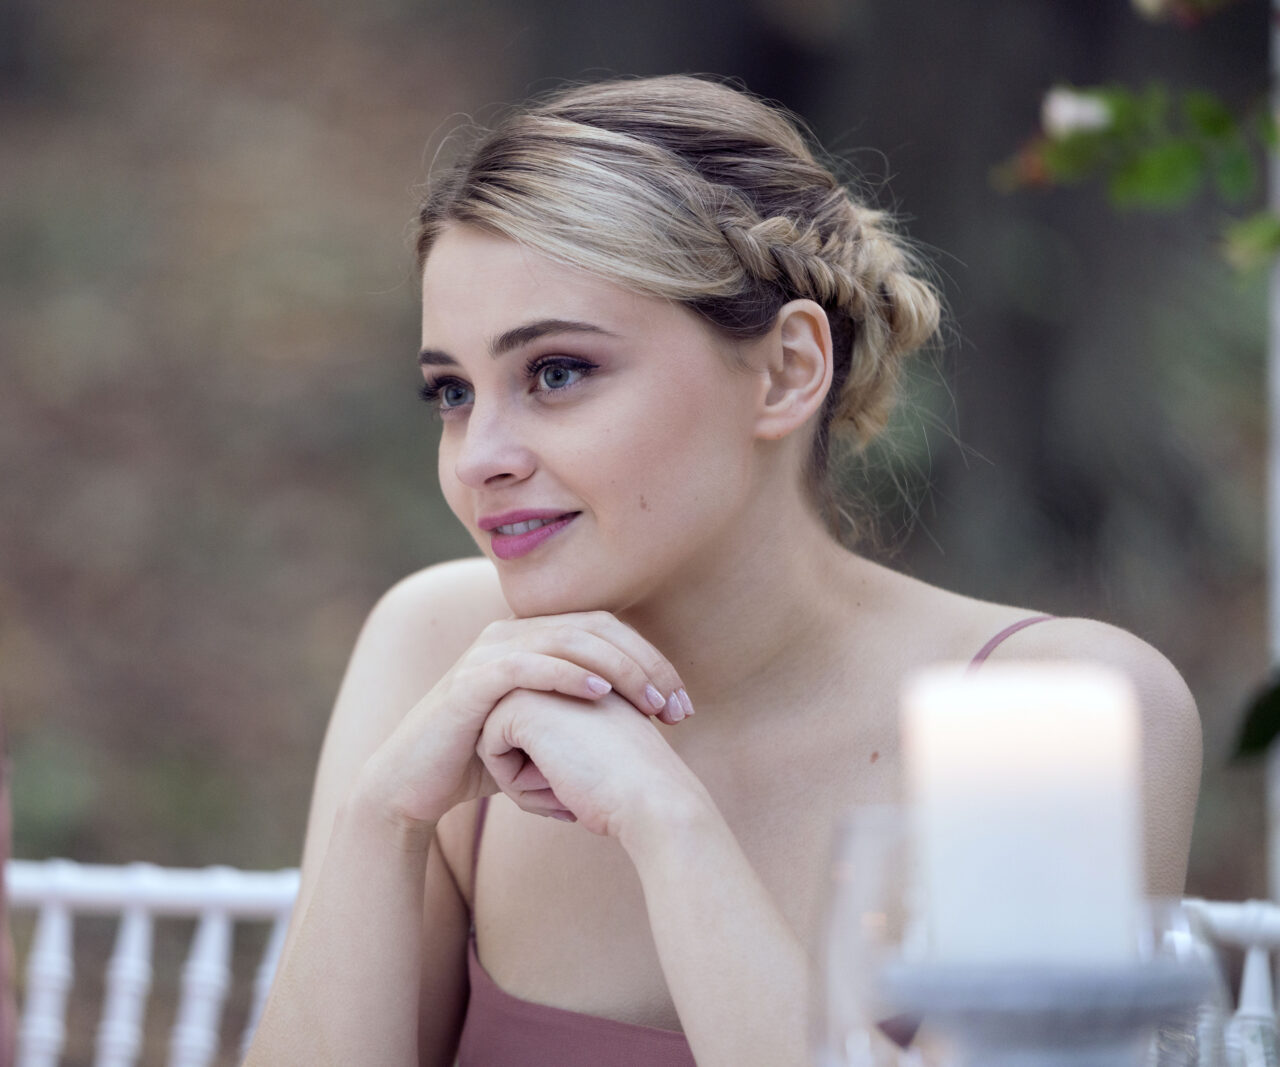 Josephine Langford stars as Tessa in After Everything, the fifth and final installment in the After franchise.